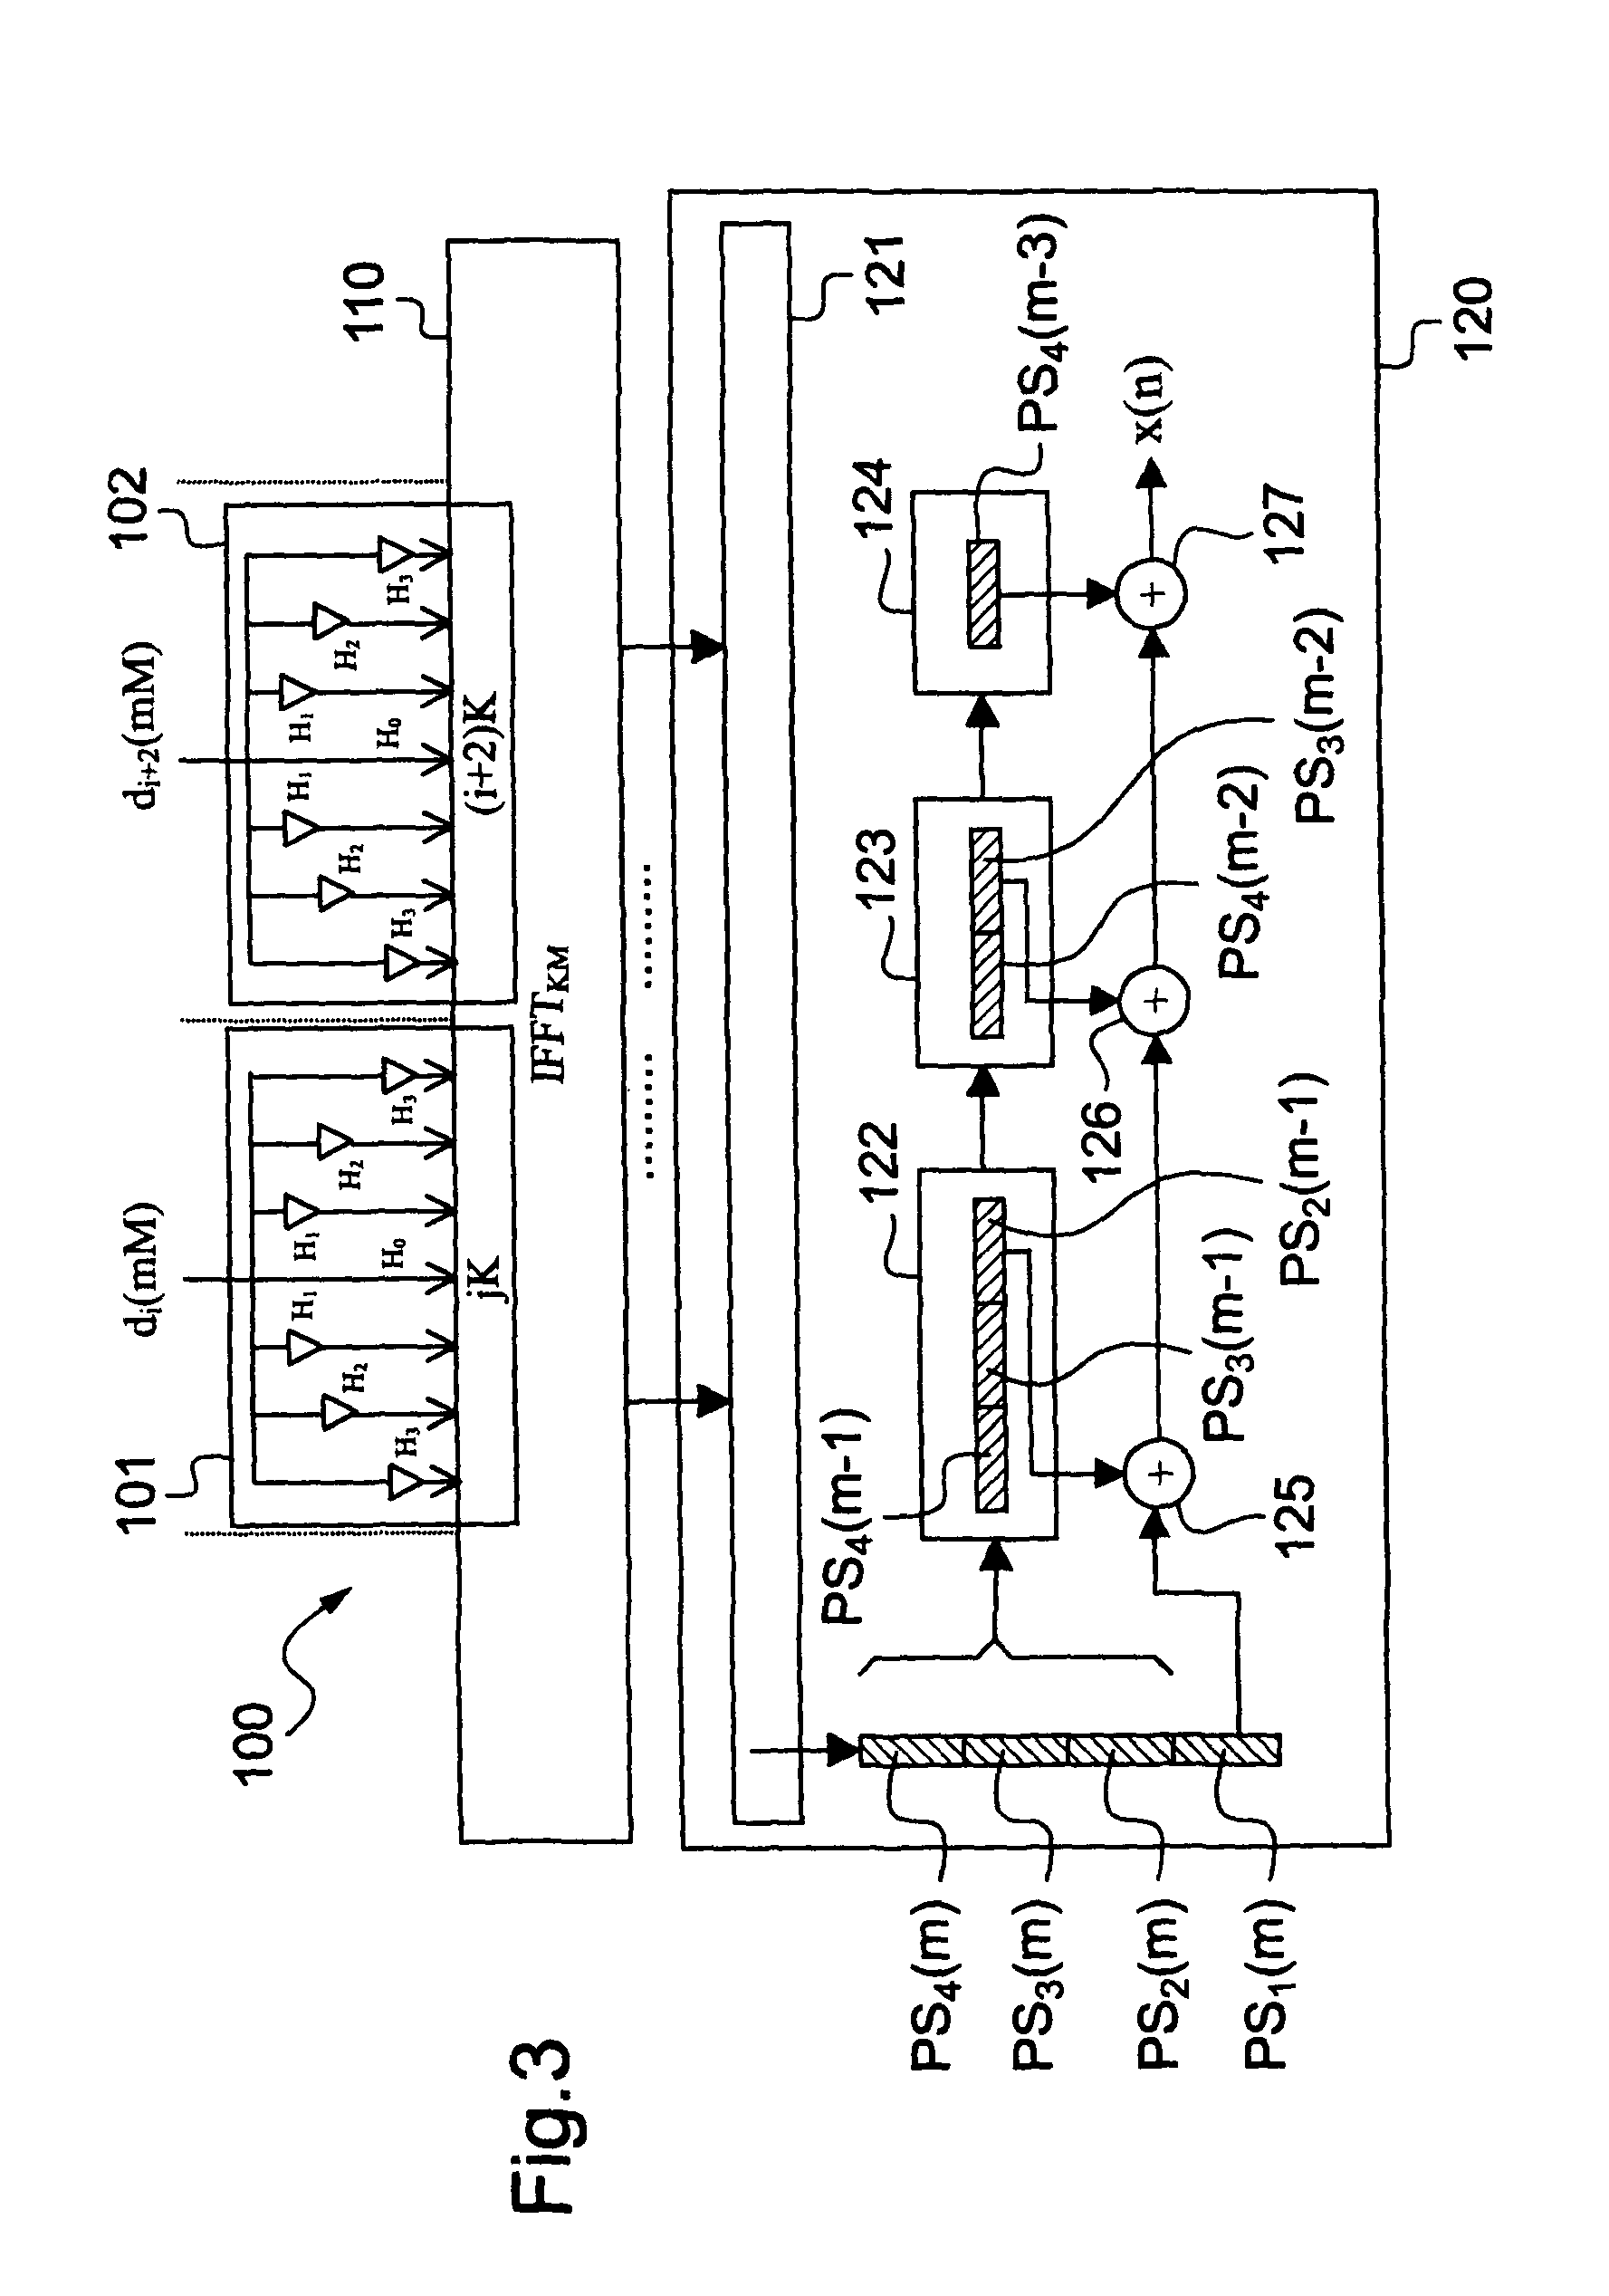 Systems for the multicarrier transmission of digital data and transmission methods using such systems